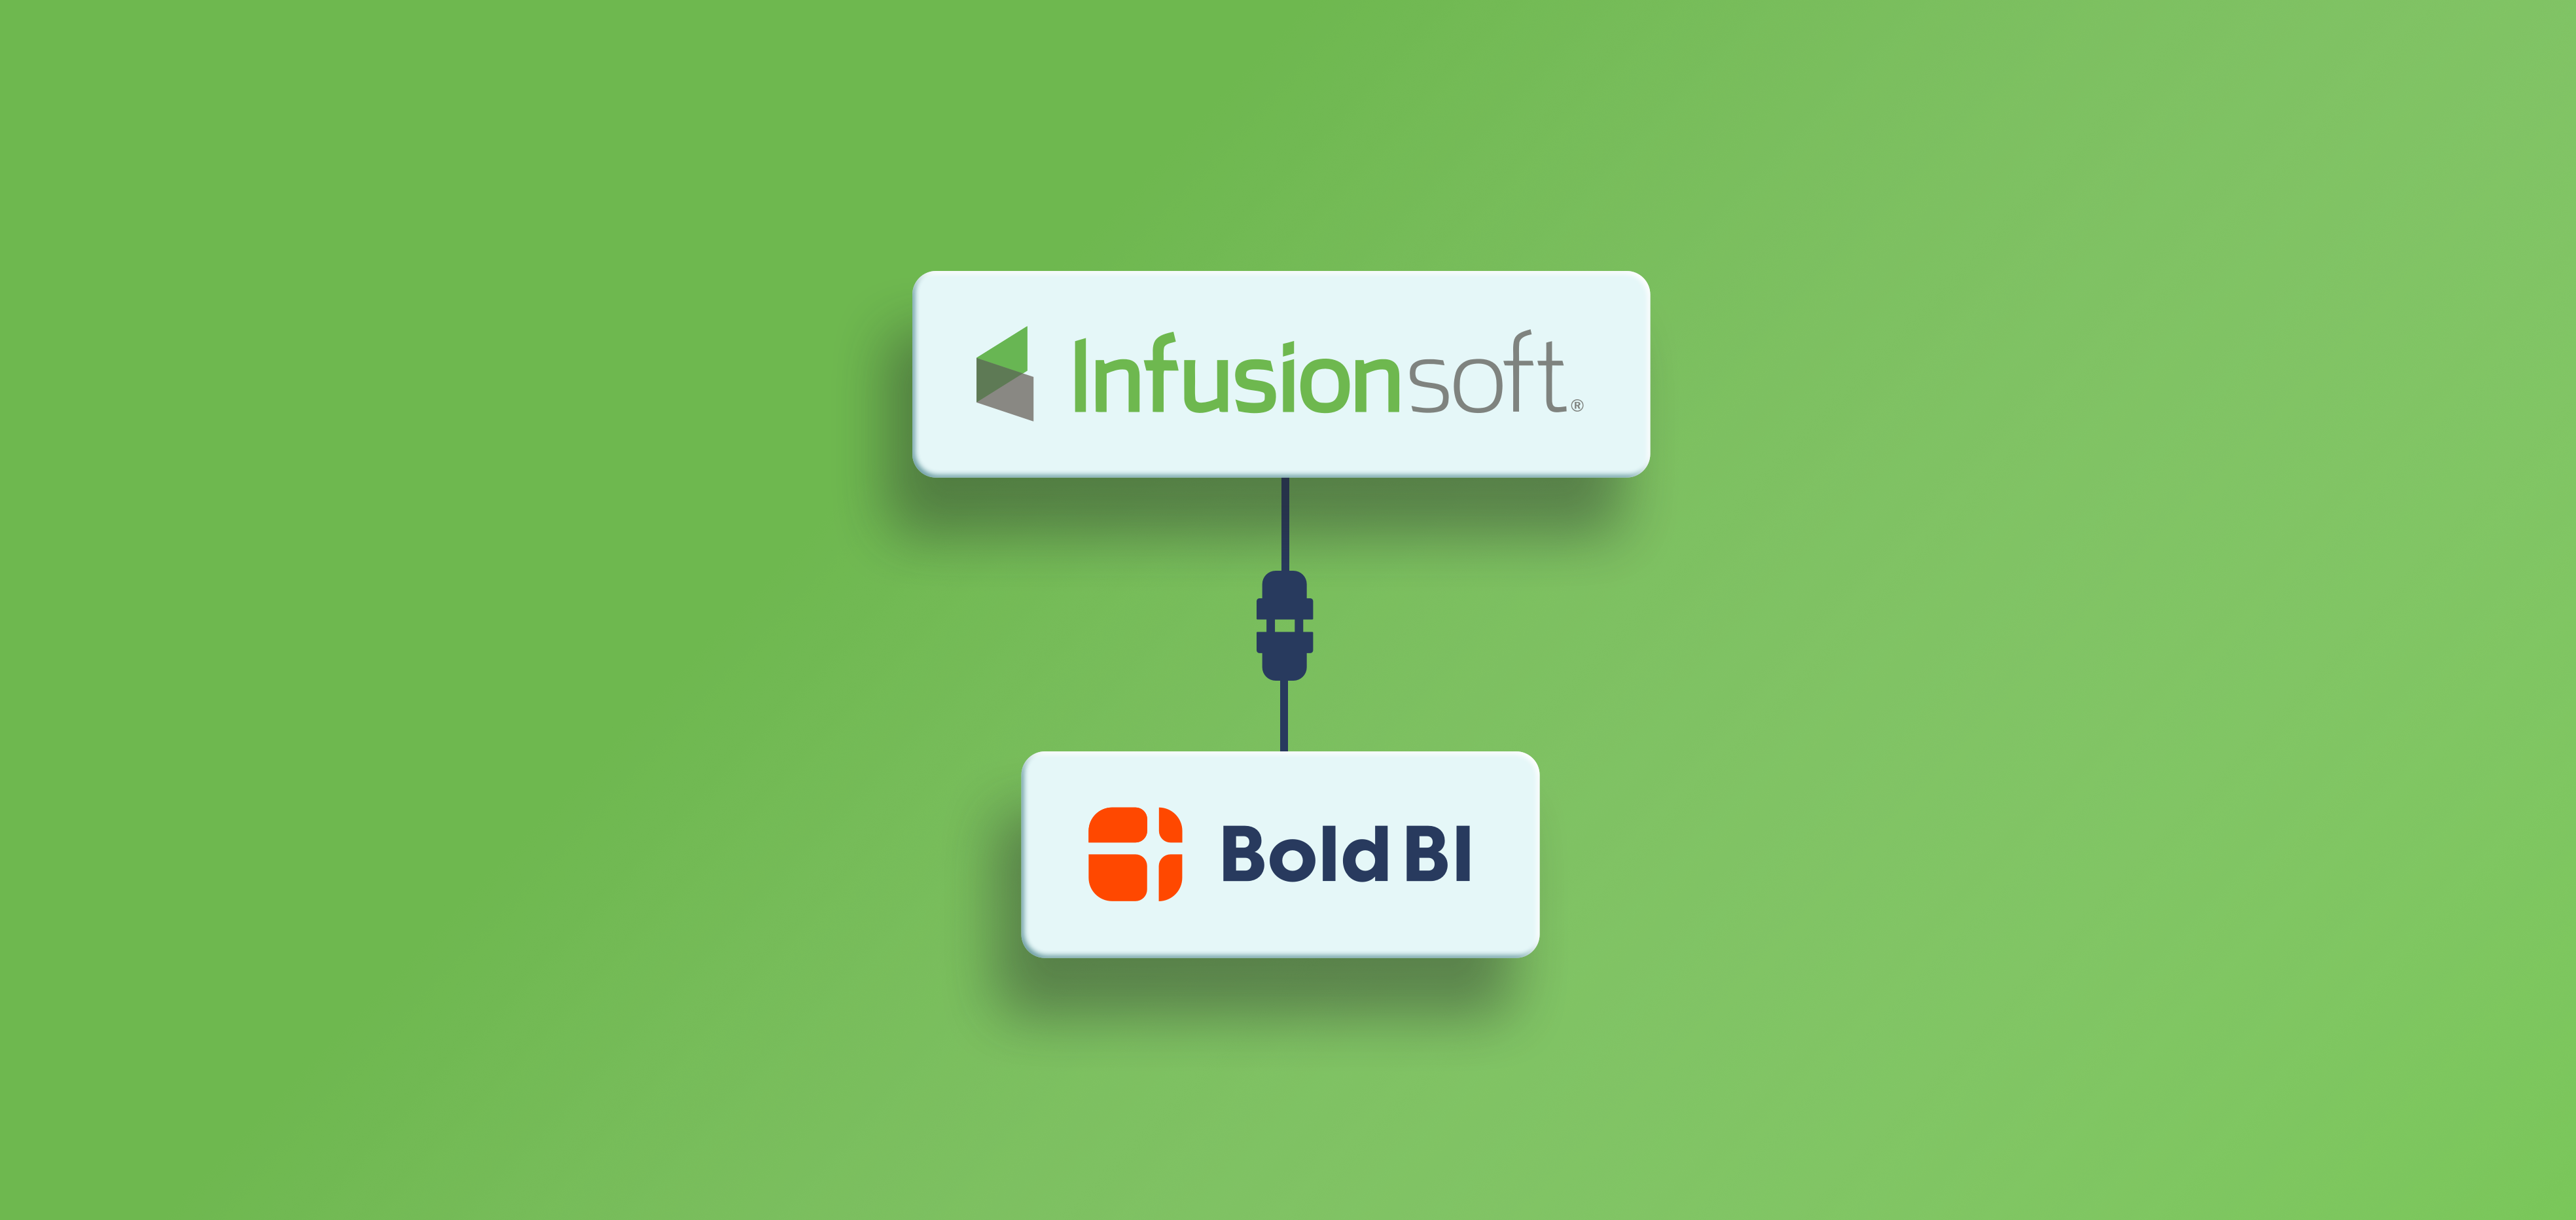 Connecting Bold BI to Infusionsoft data source